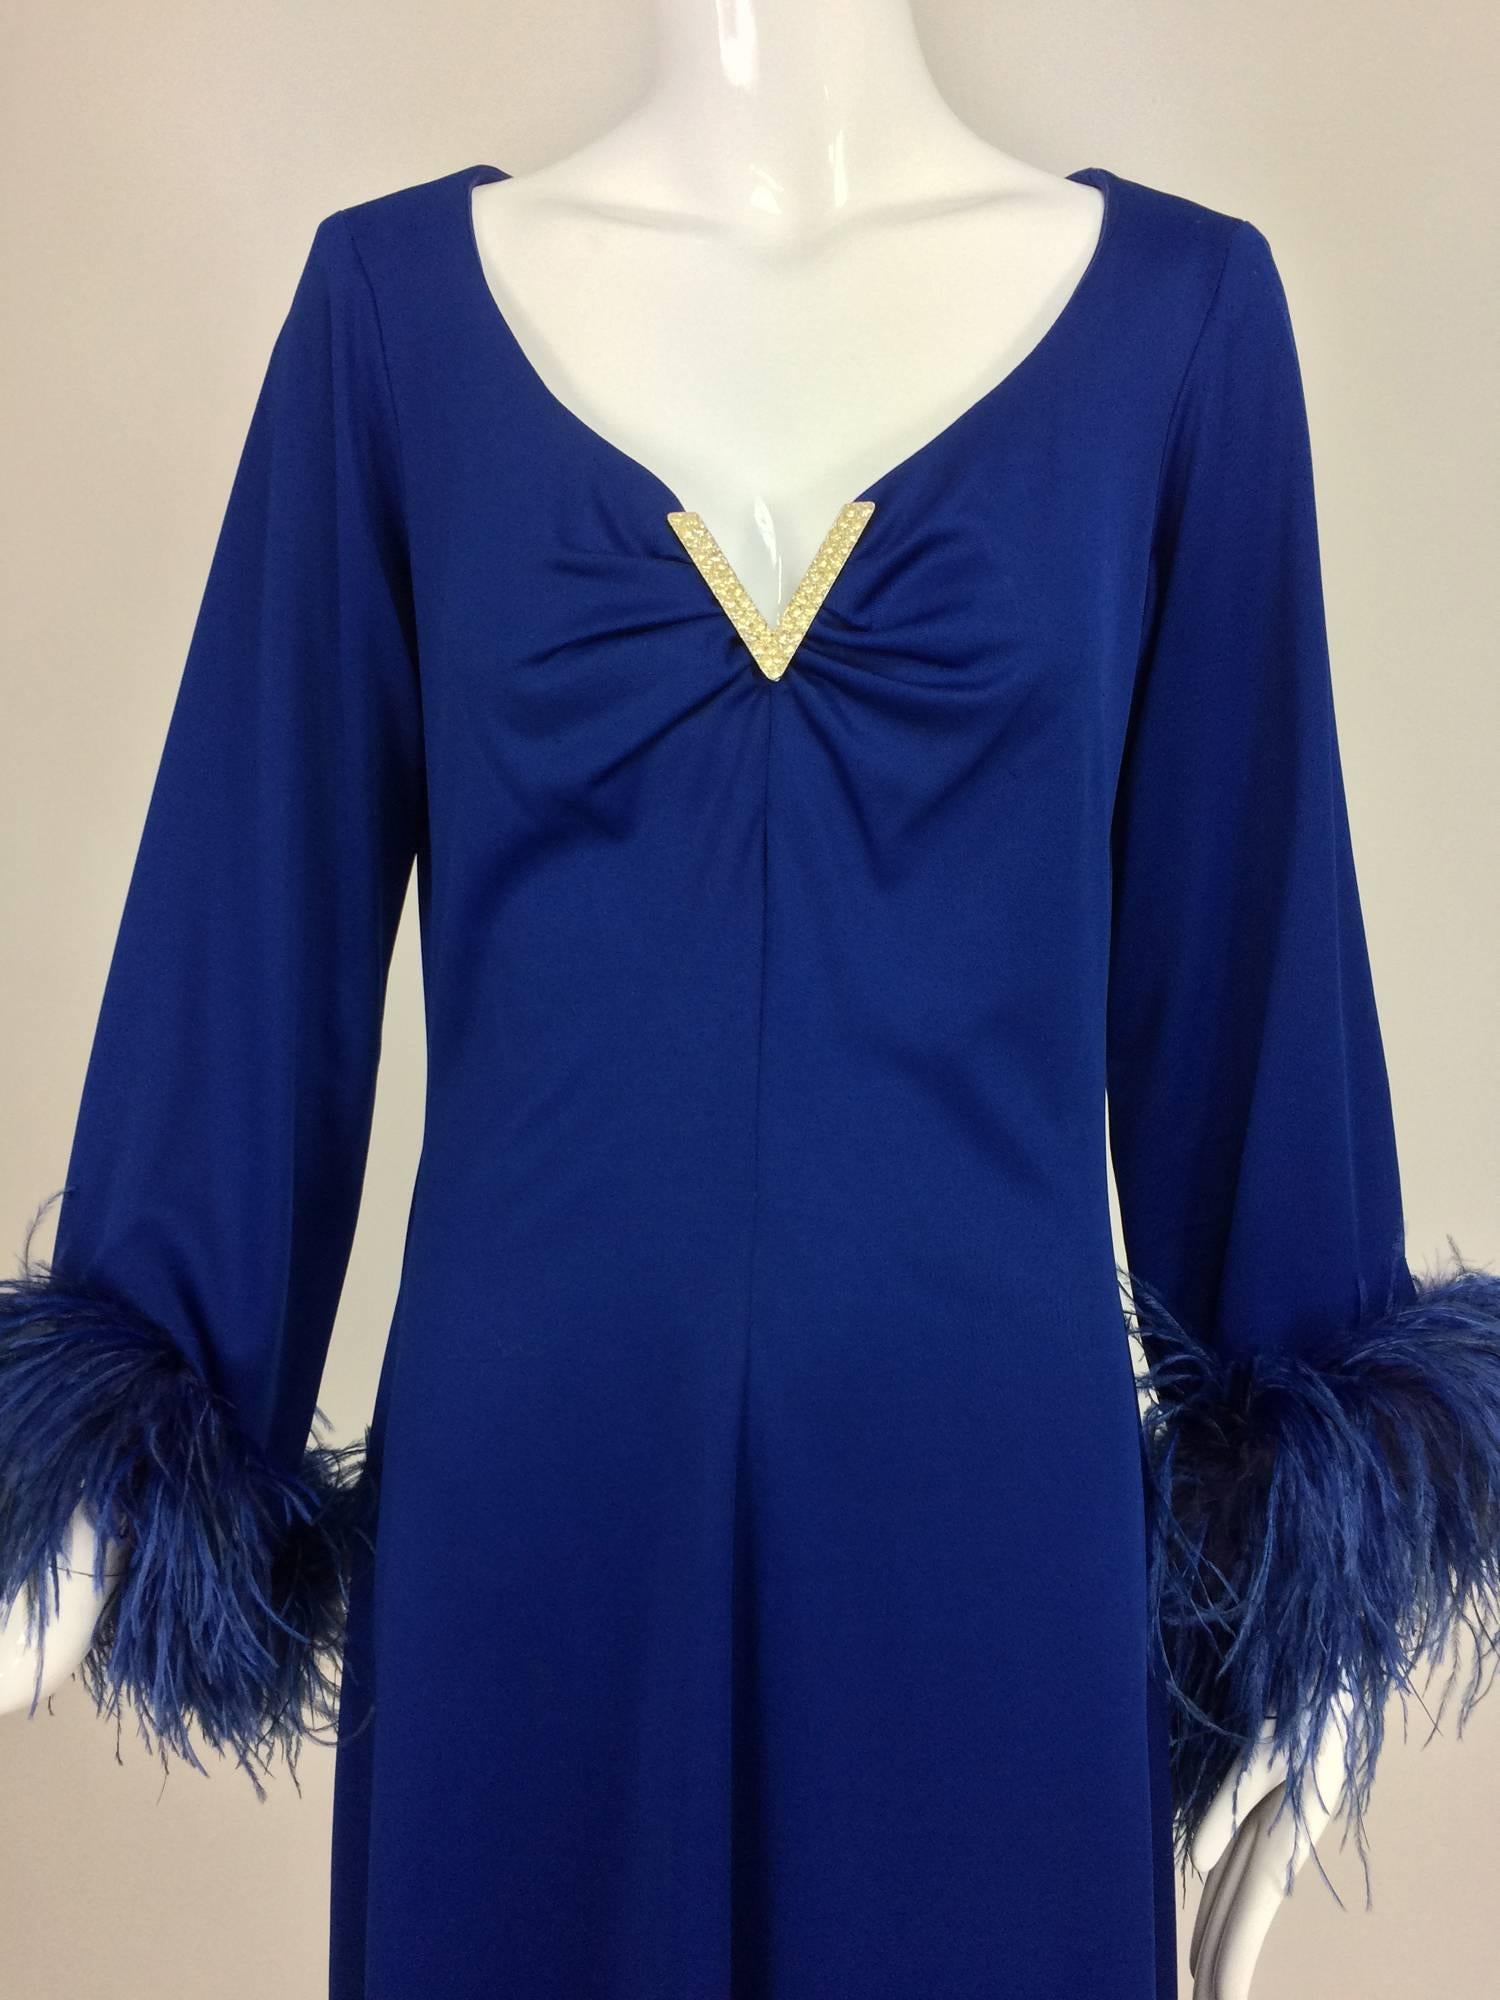 Silky electric blue jersey (poly blend) maxi dress from the 1970s...Plunge neckline has a silver metal rhinestone V pin at the bust plunge...Long sleeves with bell sleeves are trimmed with feathers at the cuffs...The dress is A line shape with